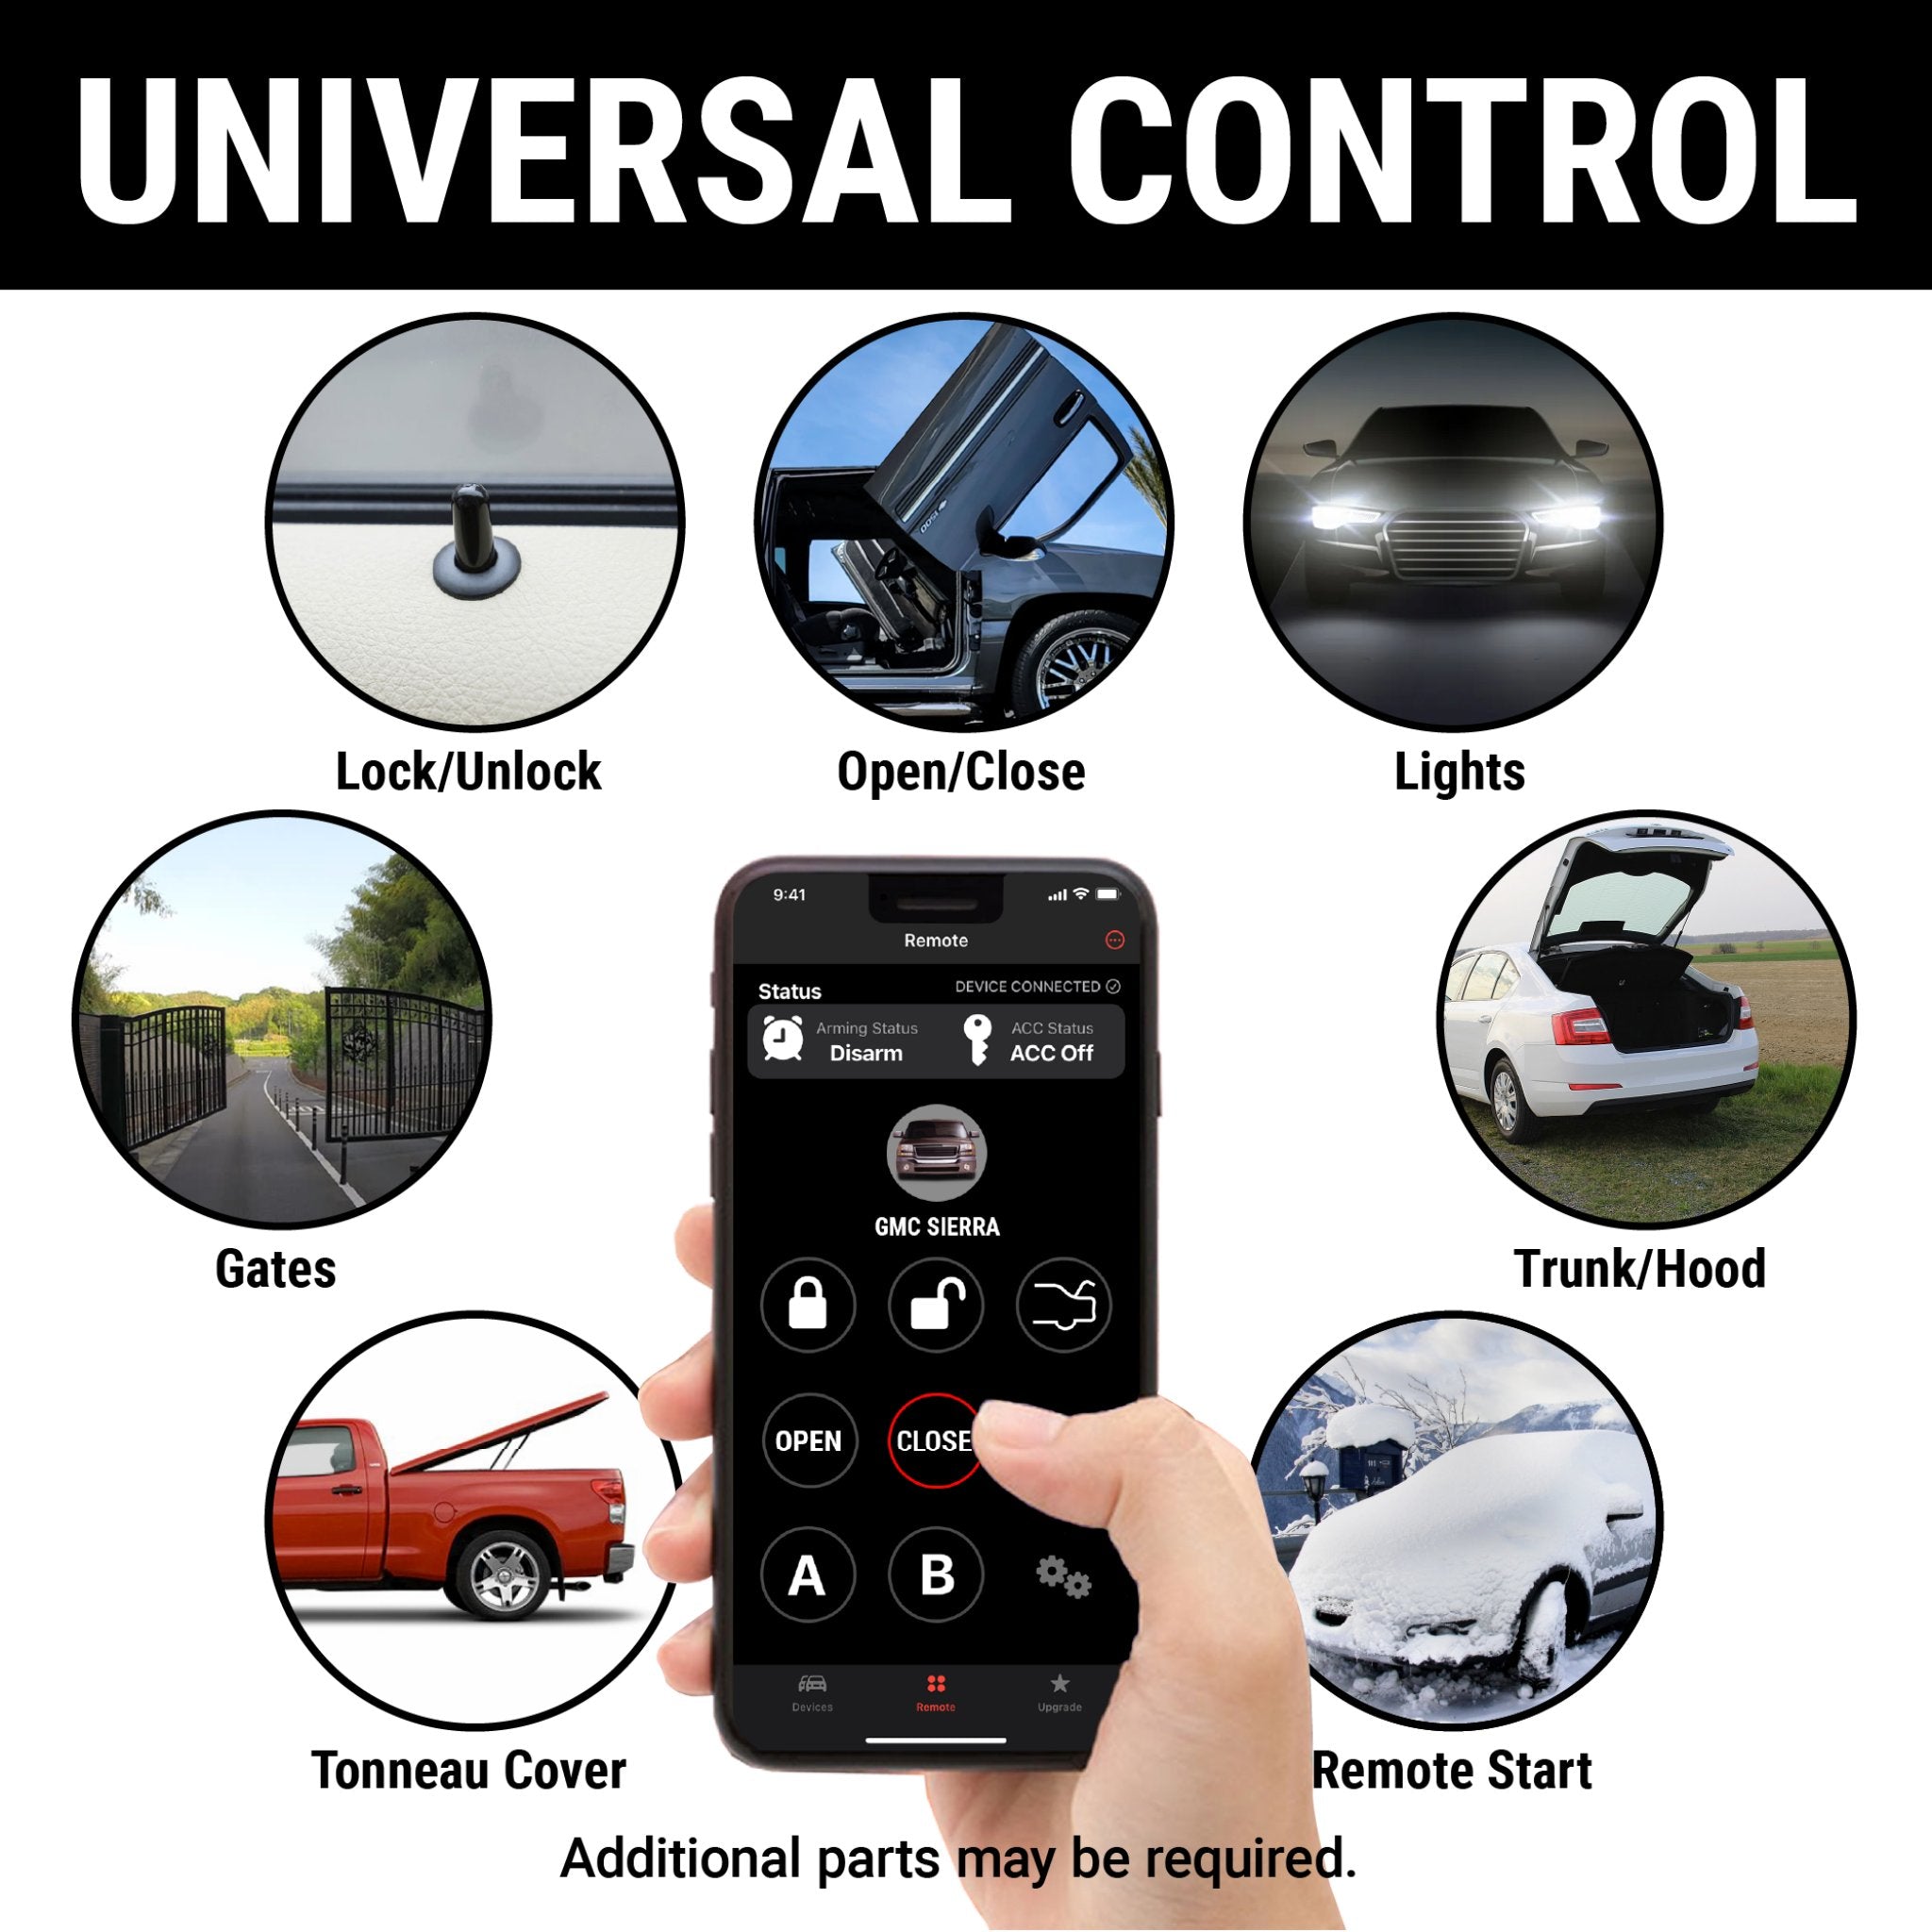 VW Volkswagen 2 Door Central Power Locking System with 8 Ch Remote Control 12V